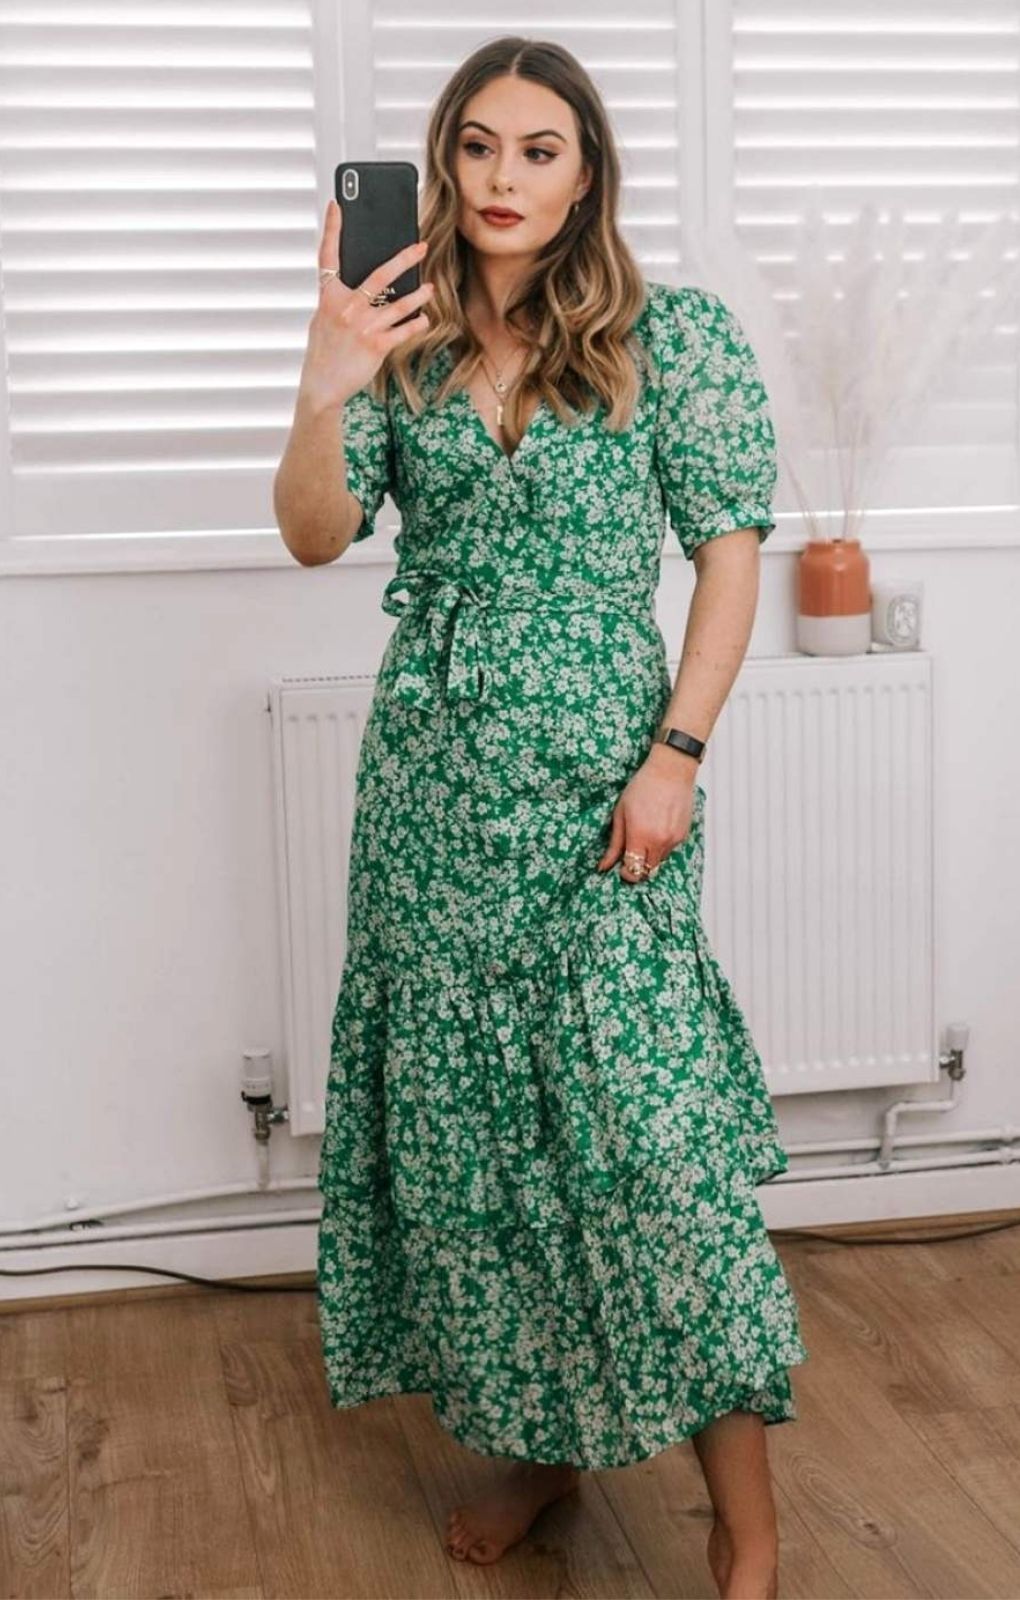 Talulah Green With Envy Midi Dress product image